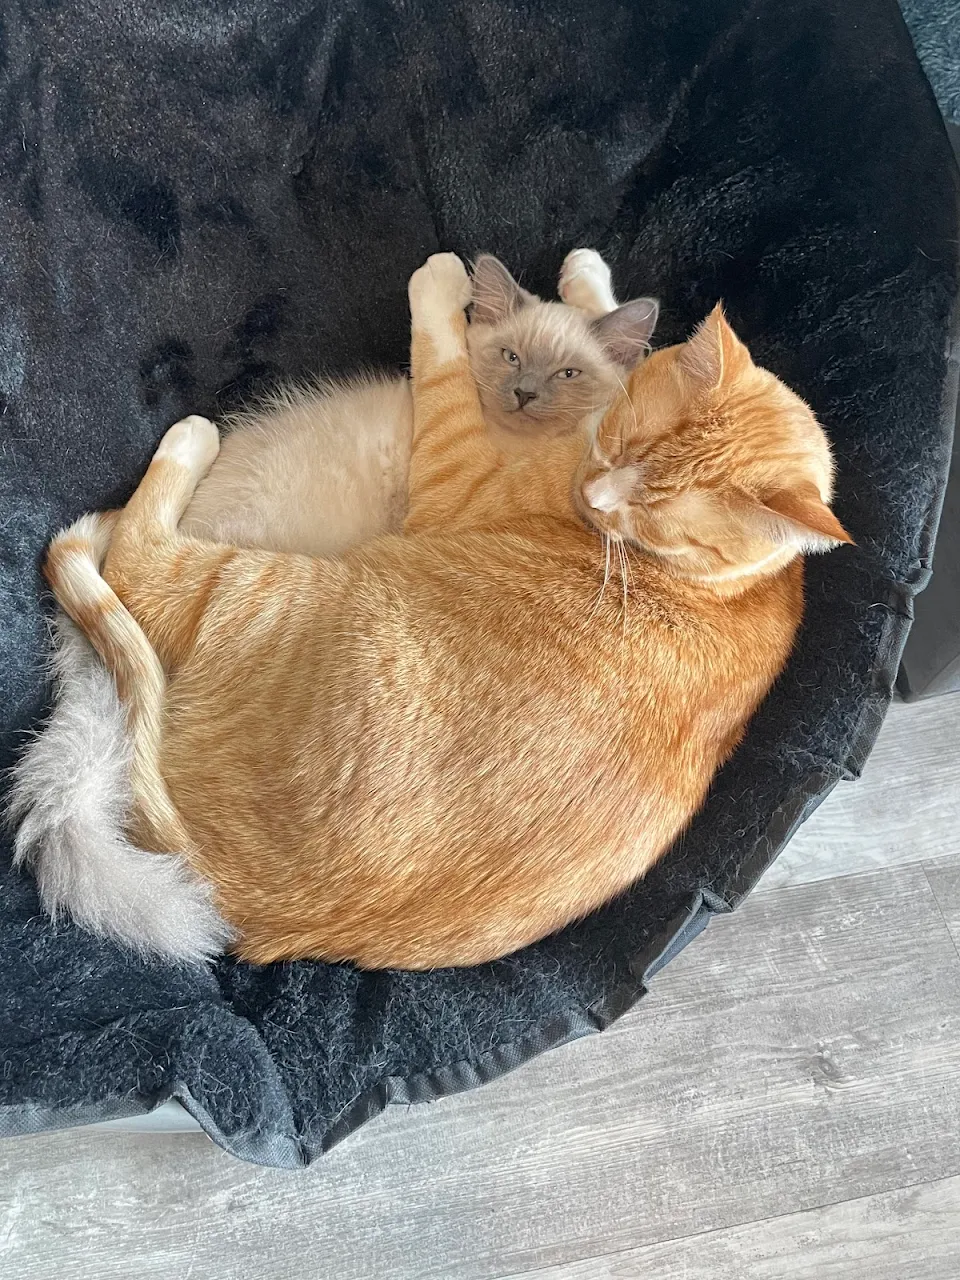 These two are inseparable